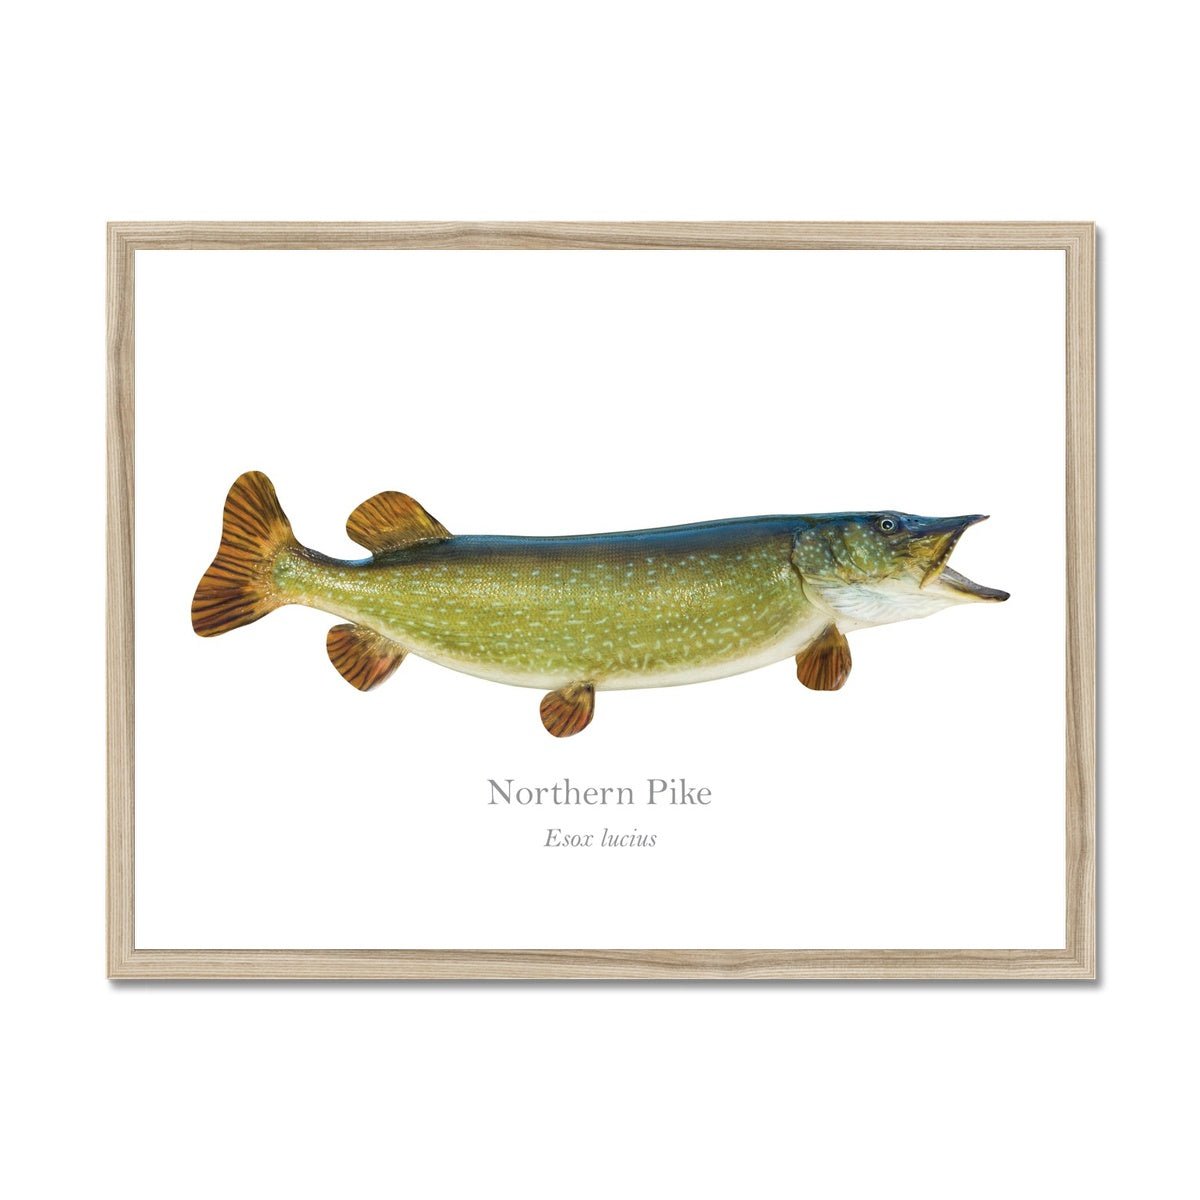 Northern Pike - Framed Print - With Scientific Name - madfishlab.com